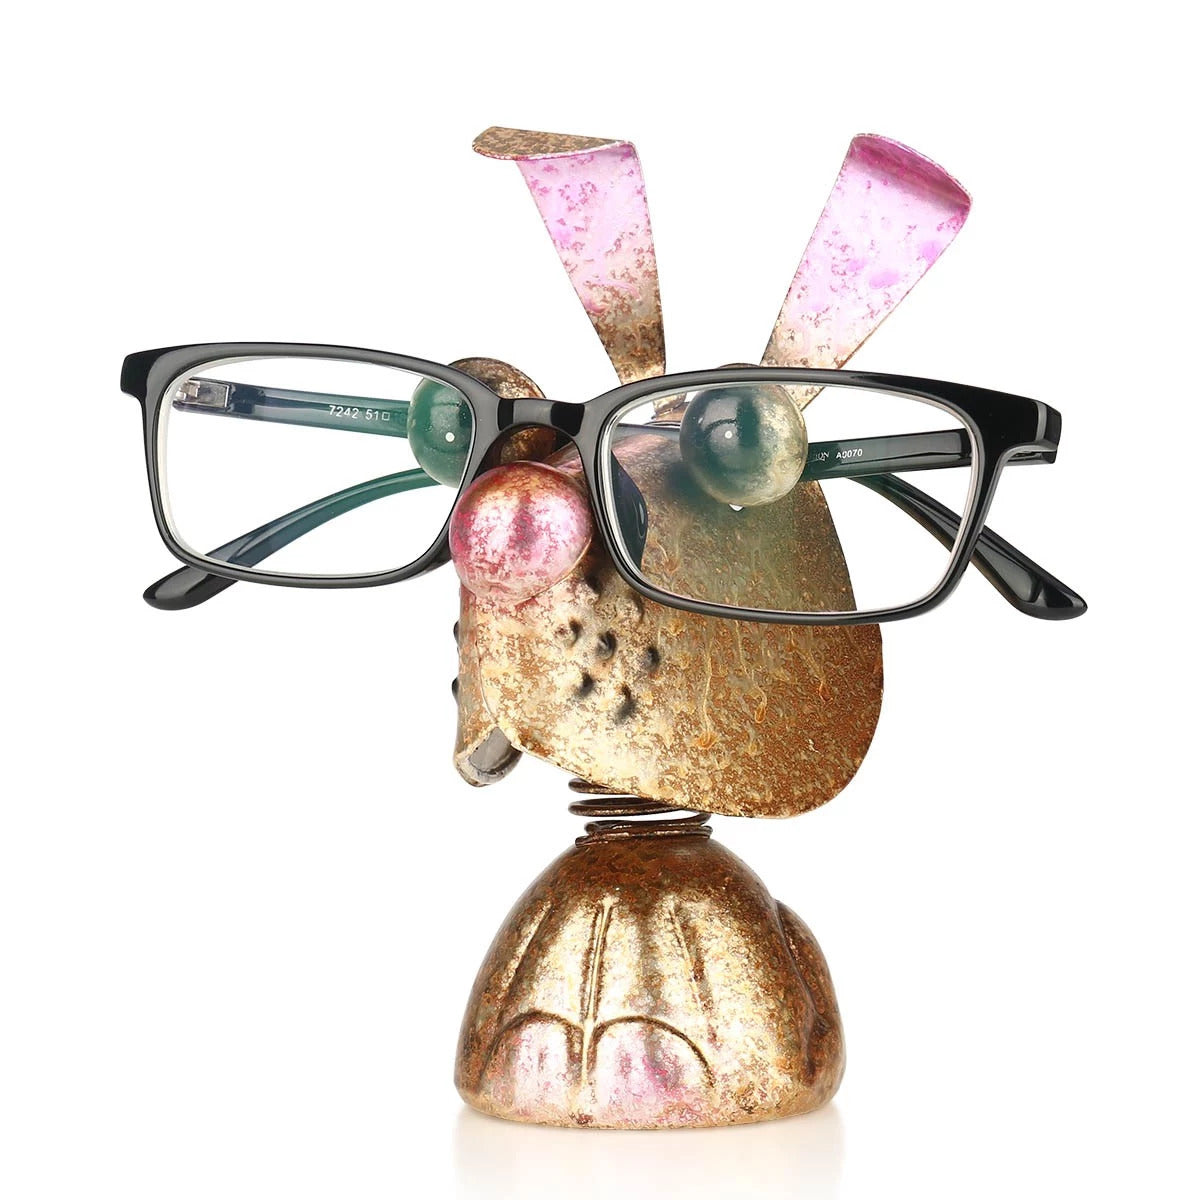 Eyeglass Rack with Rabbit Animal Figurines to Desk Organizer and Desktop Accessories in Business or Home Life